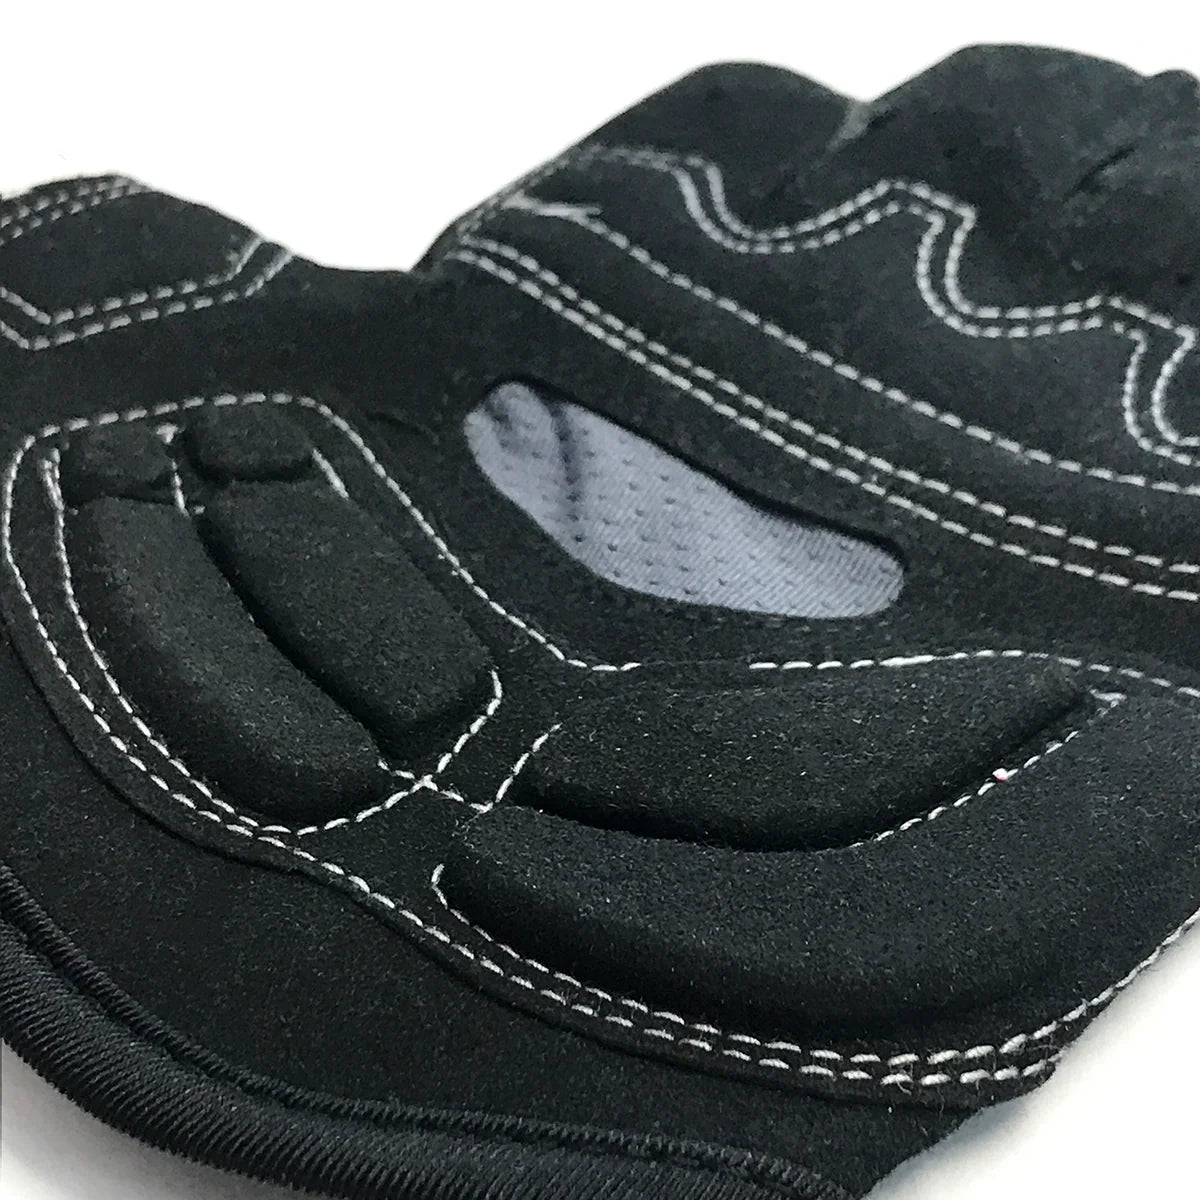 Personalised Cycling Gloves in Size Medium